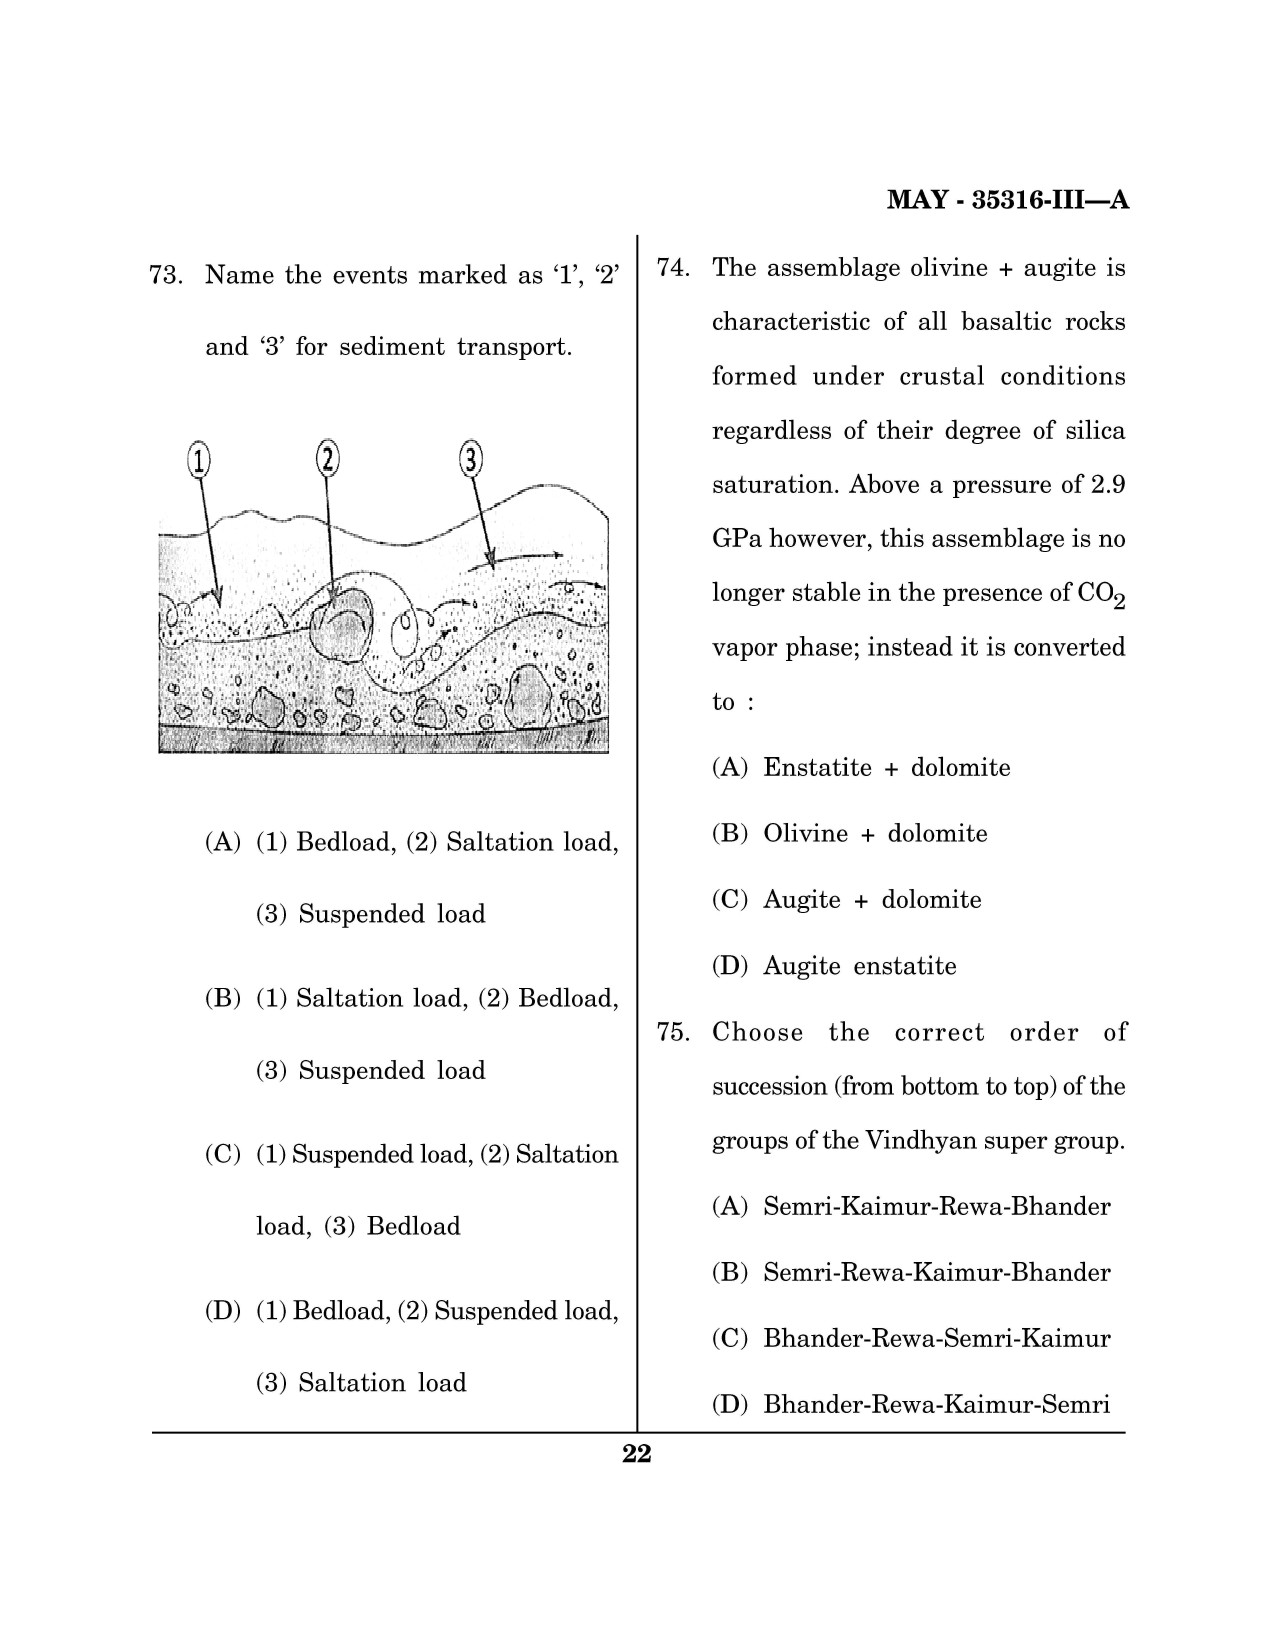 Maharashtra SET Earth Atmospheric Ocean Planetary Science Question Paper III May 2016 21